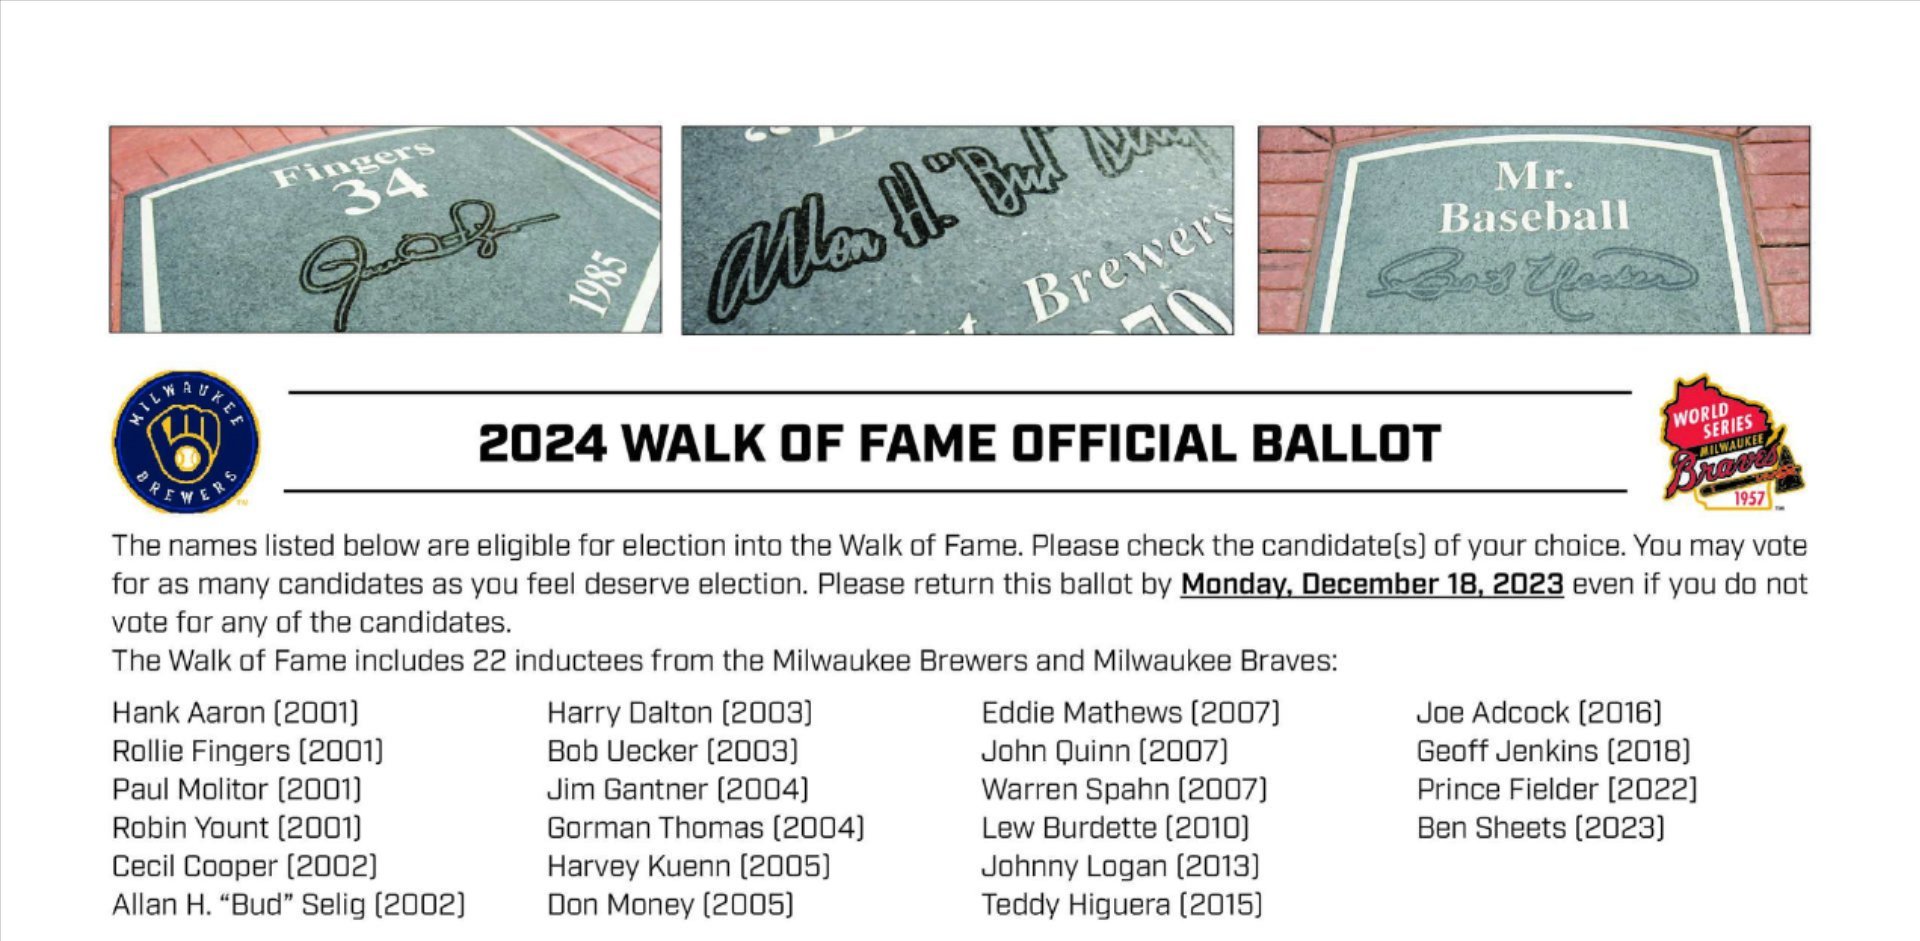 The top of the 2024 Walk of Fame ballot